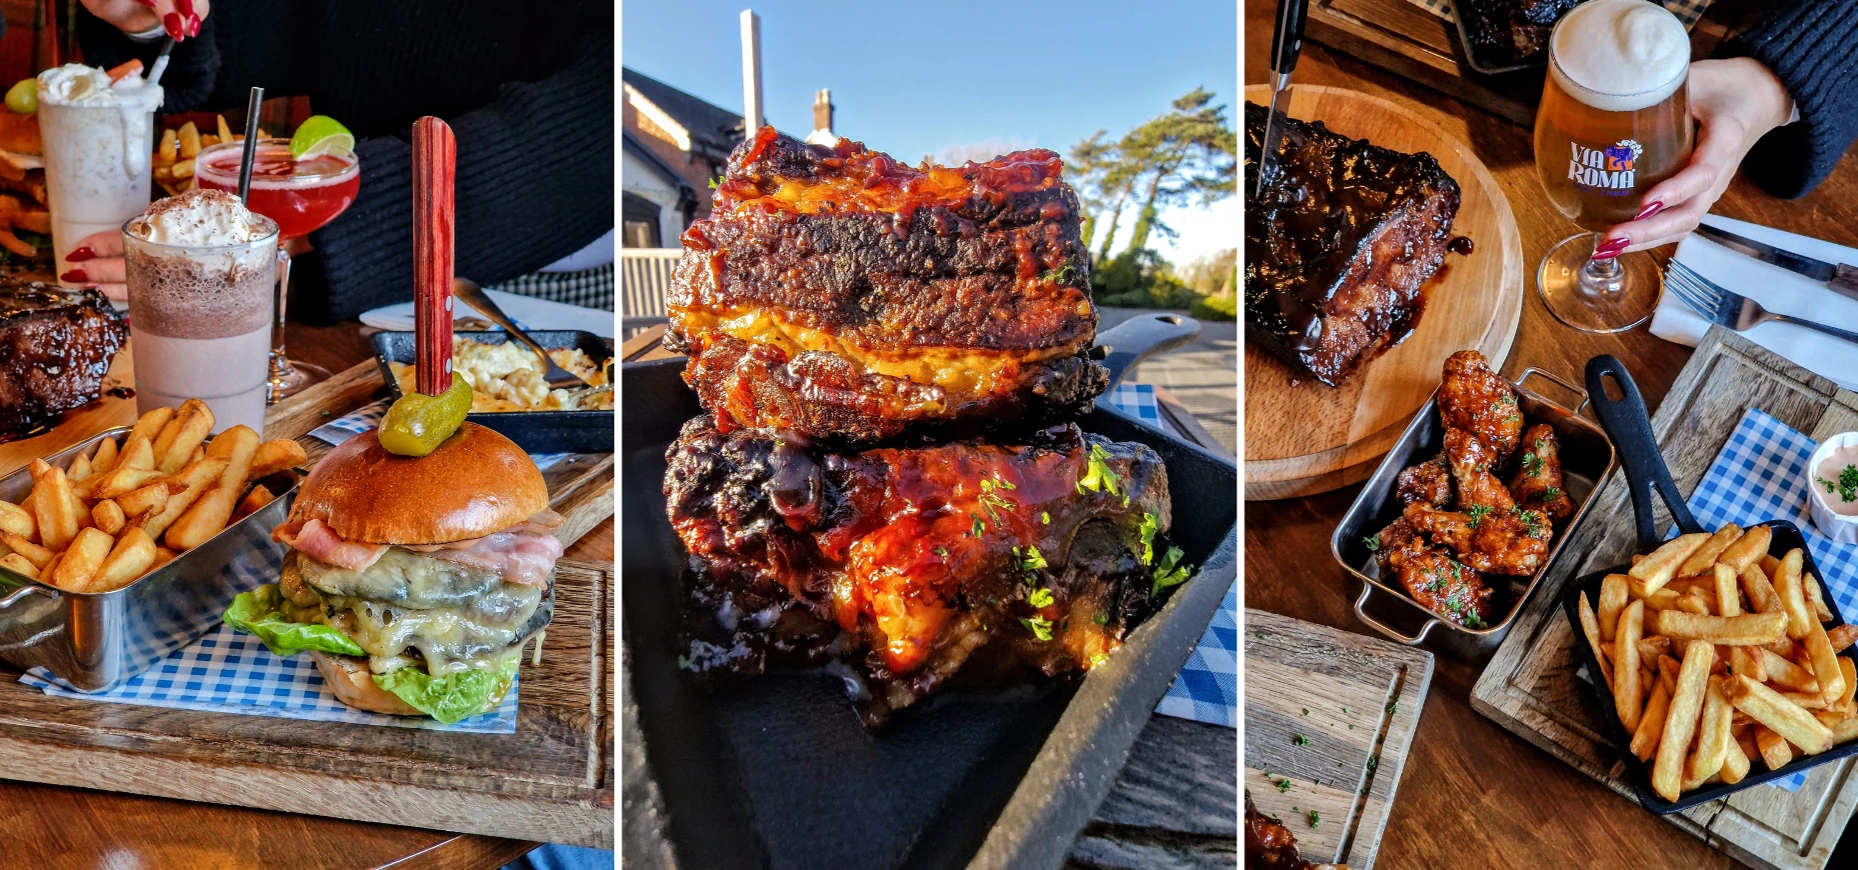 A selection of food stills from Henry’s Smokehouse in Lancashire.